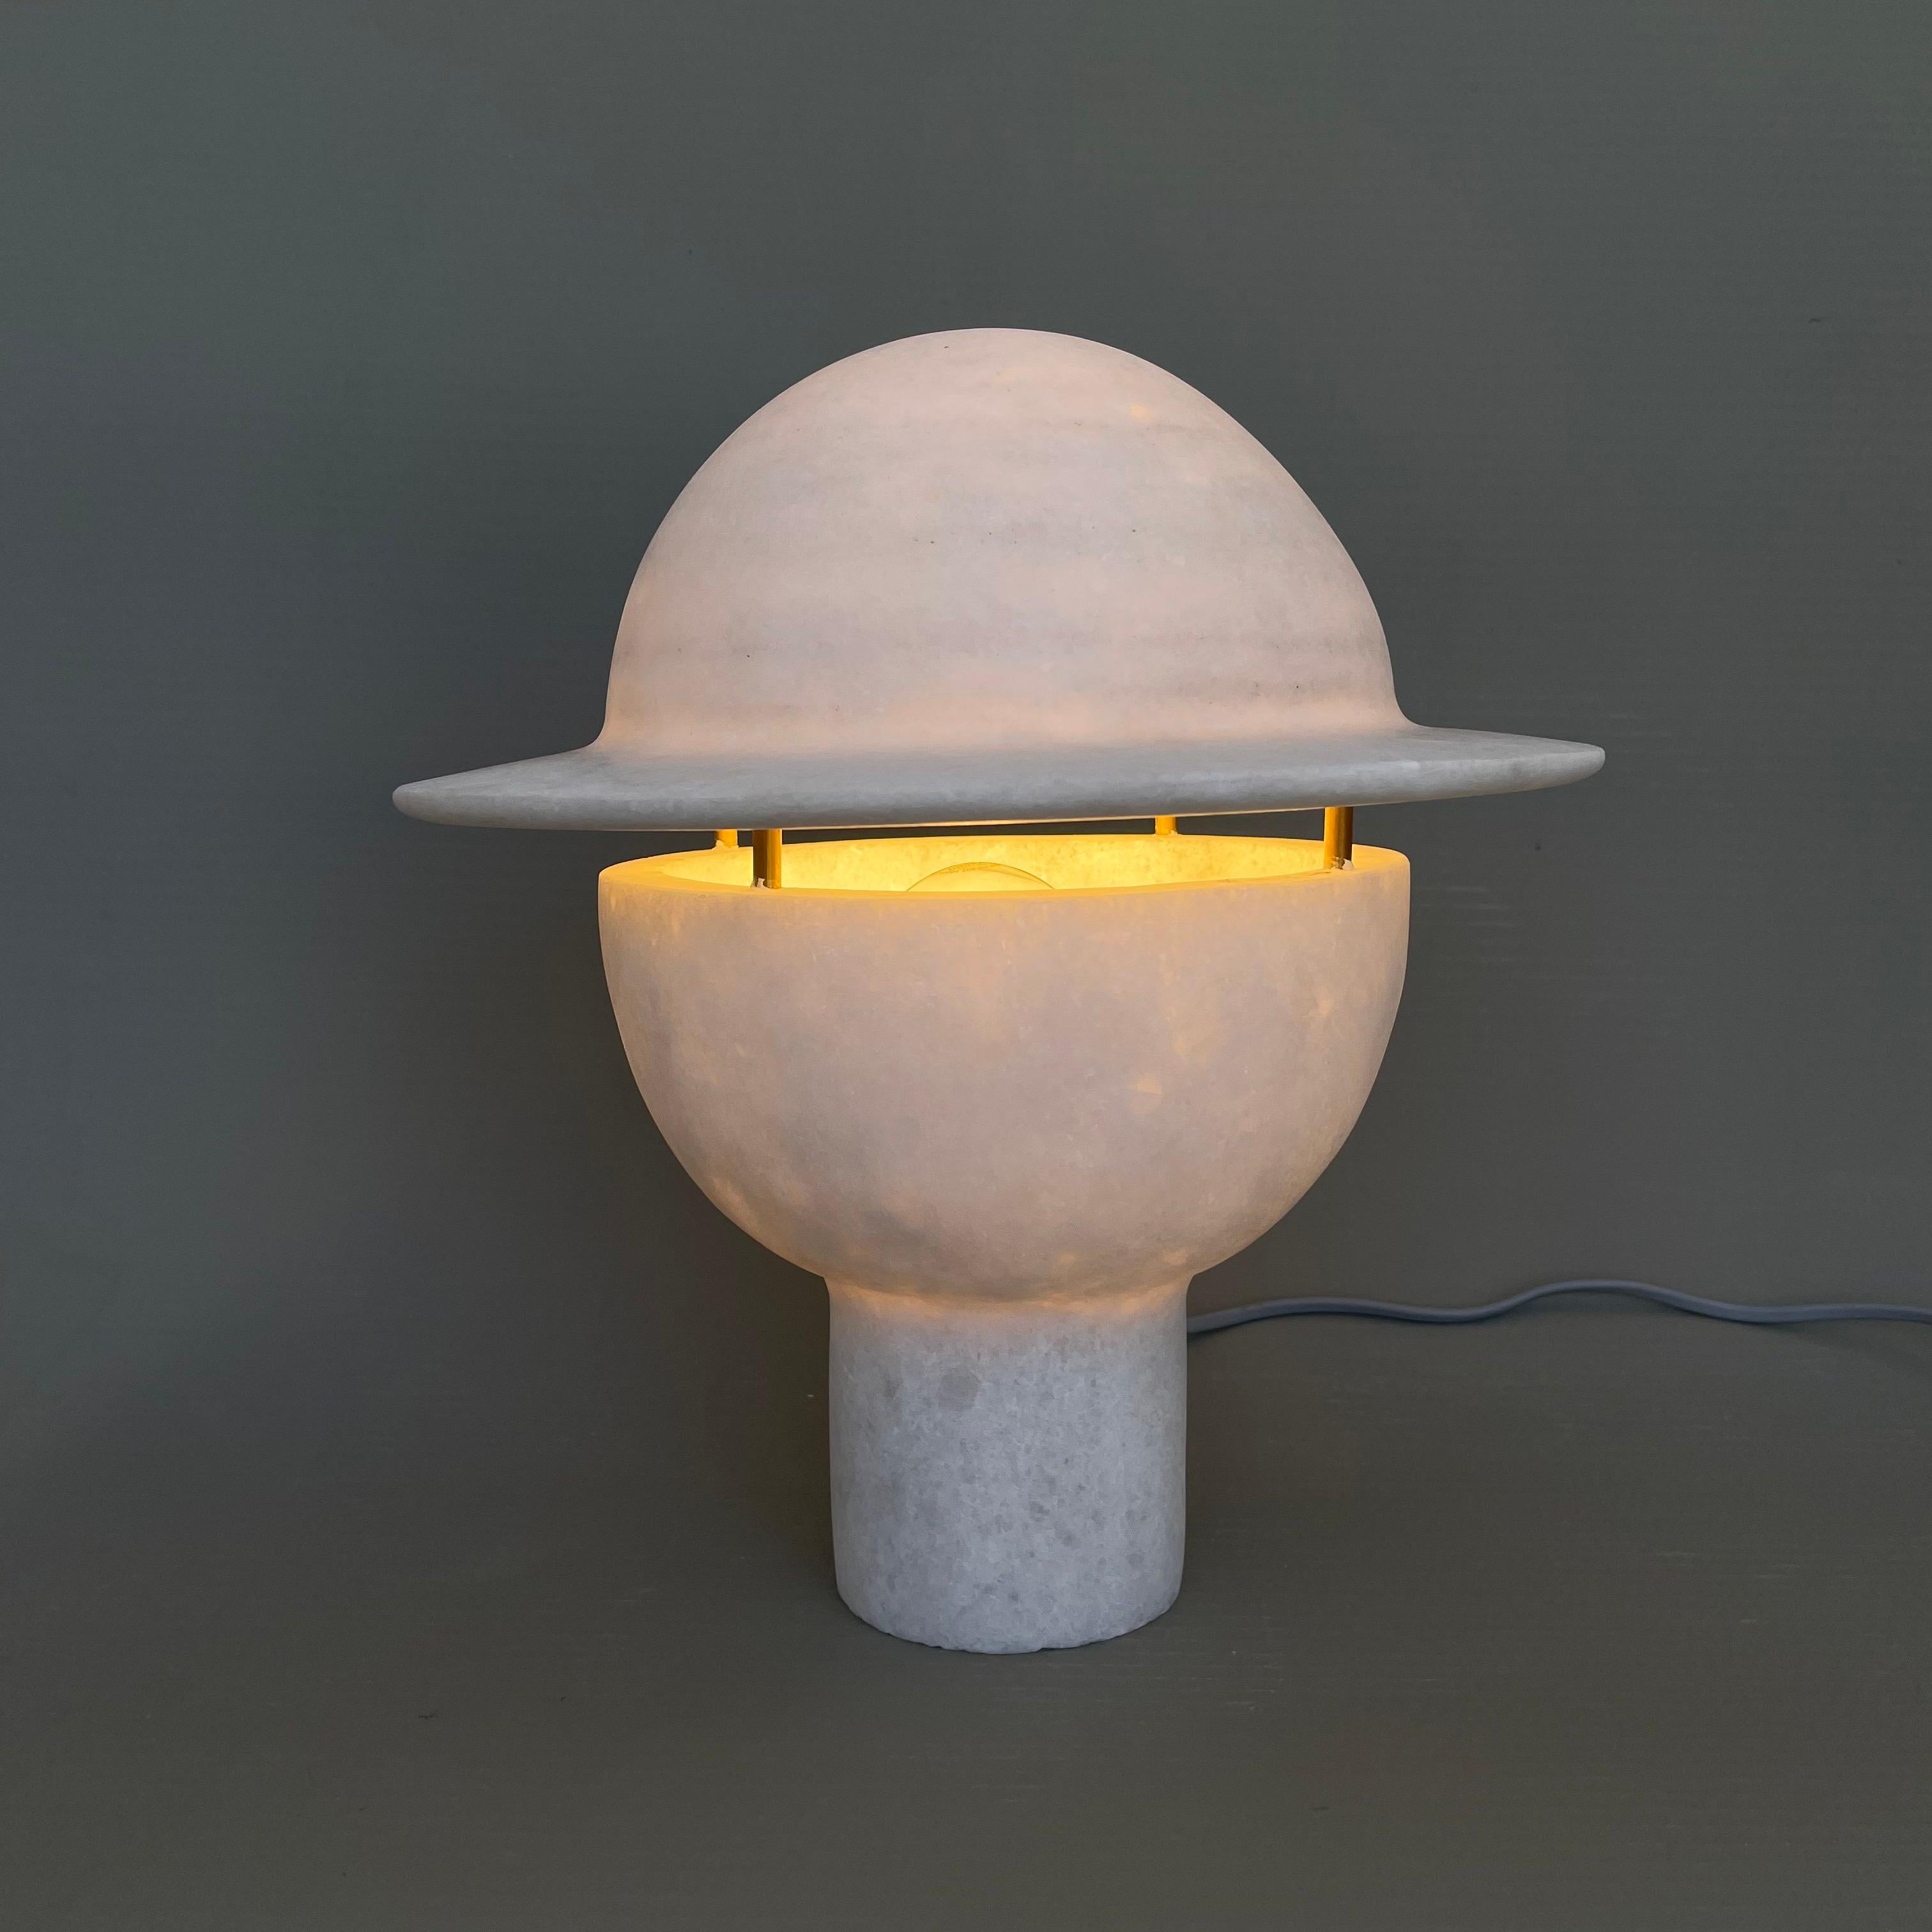 Unique Marble table lamp by Tom von Kaenel
Dimensions: W 28 x 23 cm
Materials: Marble

All the artworks of Tom von Kaenel are unique, handcrafted by himself.
The stones all come from the surrounding marble quarries of the island. The Naxian